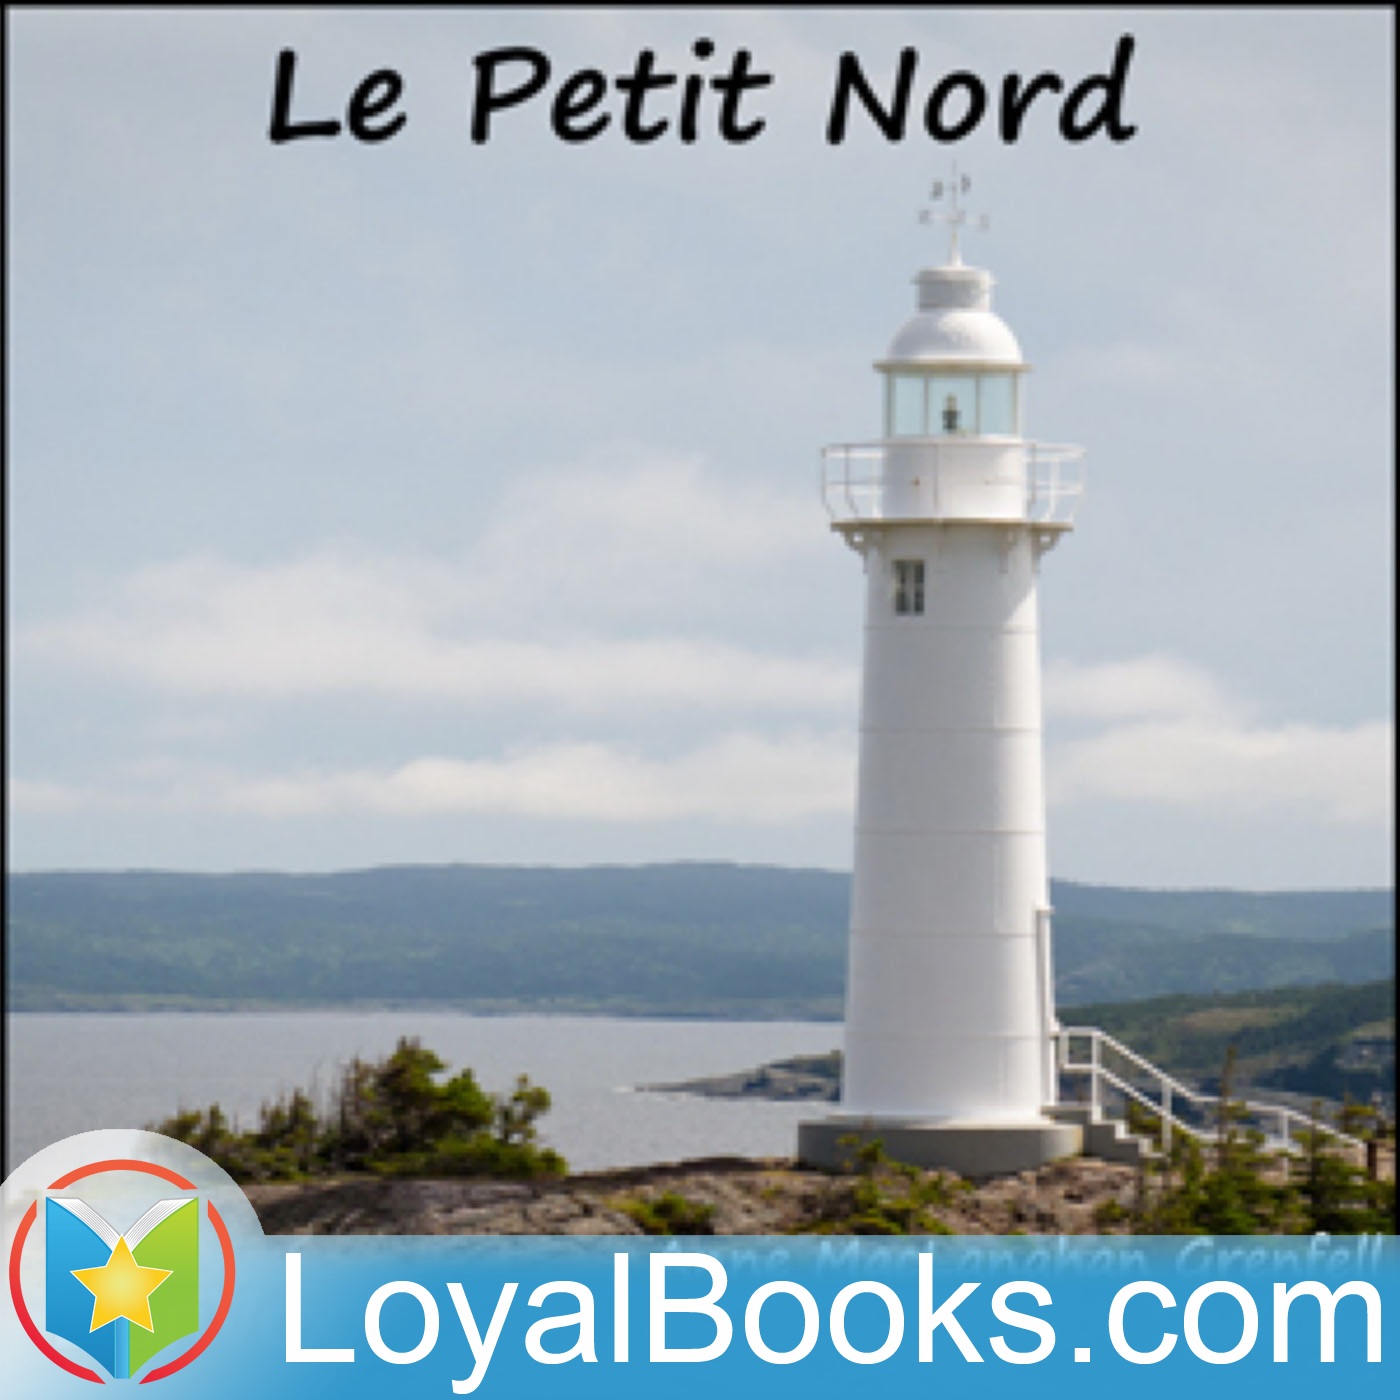 Le Petit Nord by Anne MacLanahan Grenfell